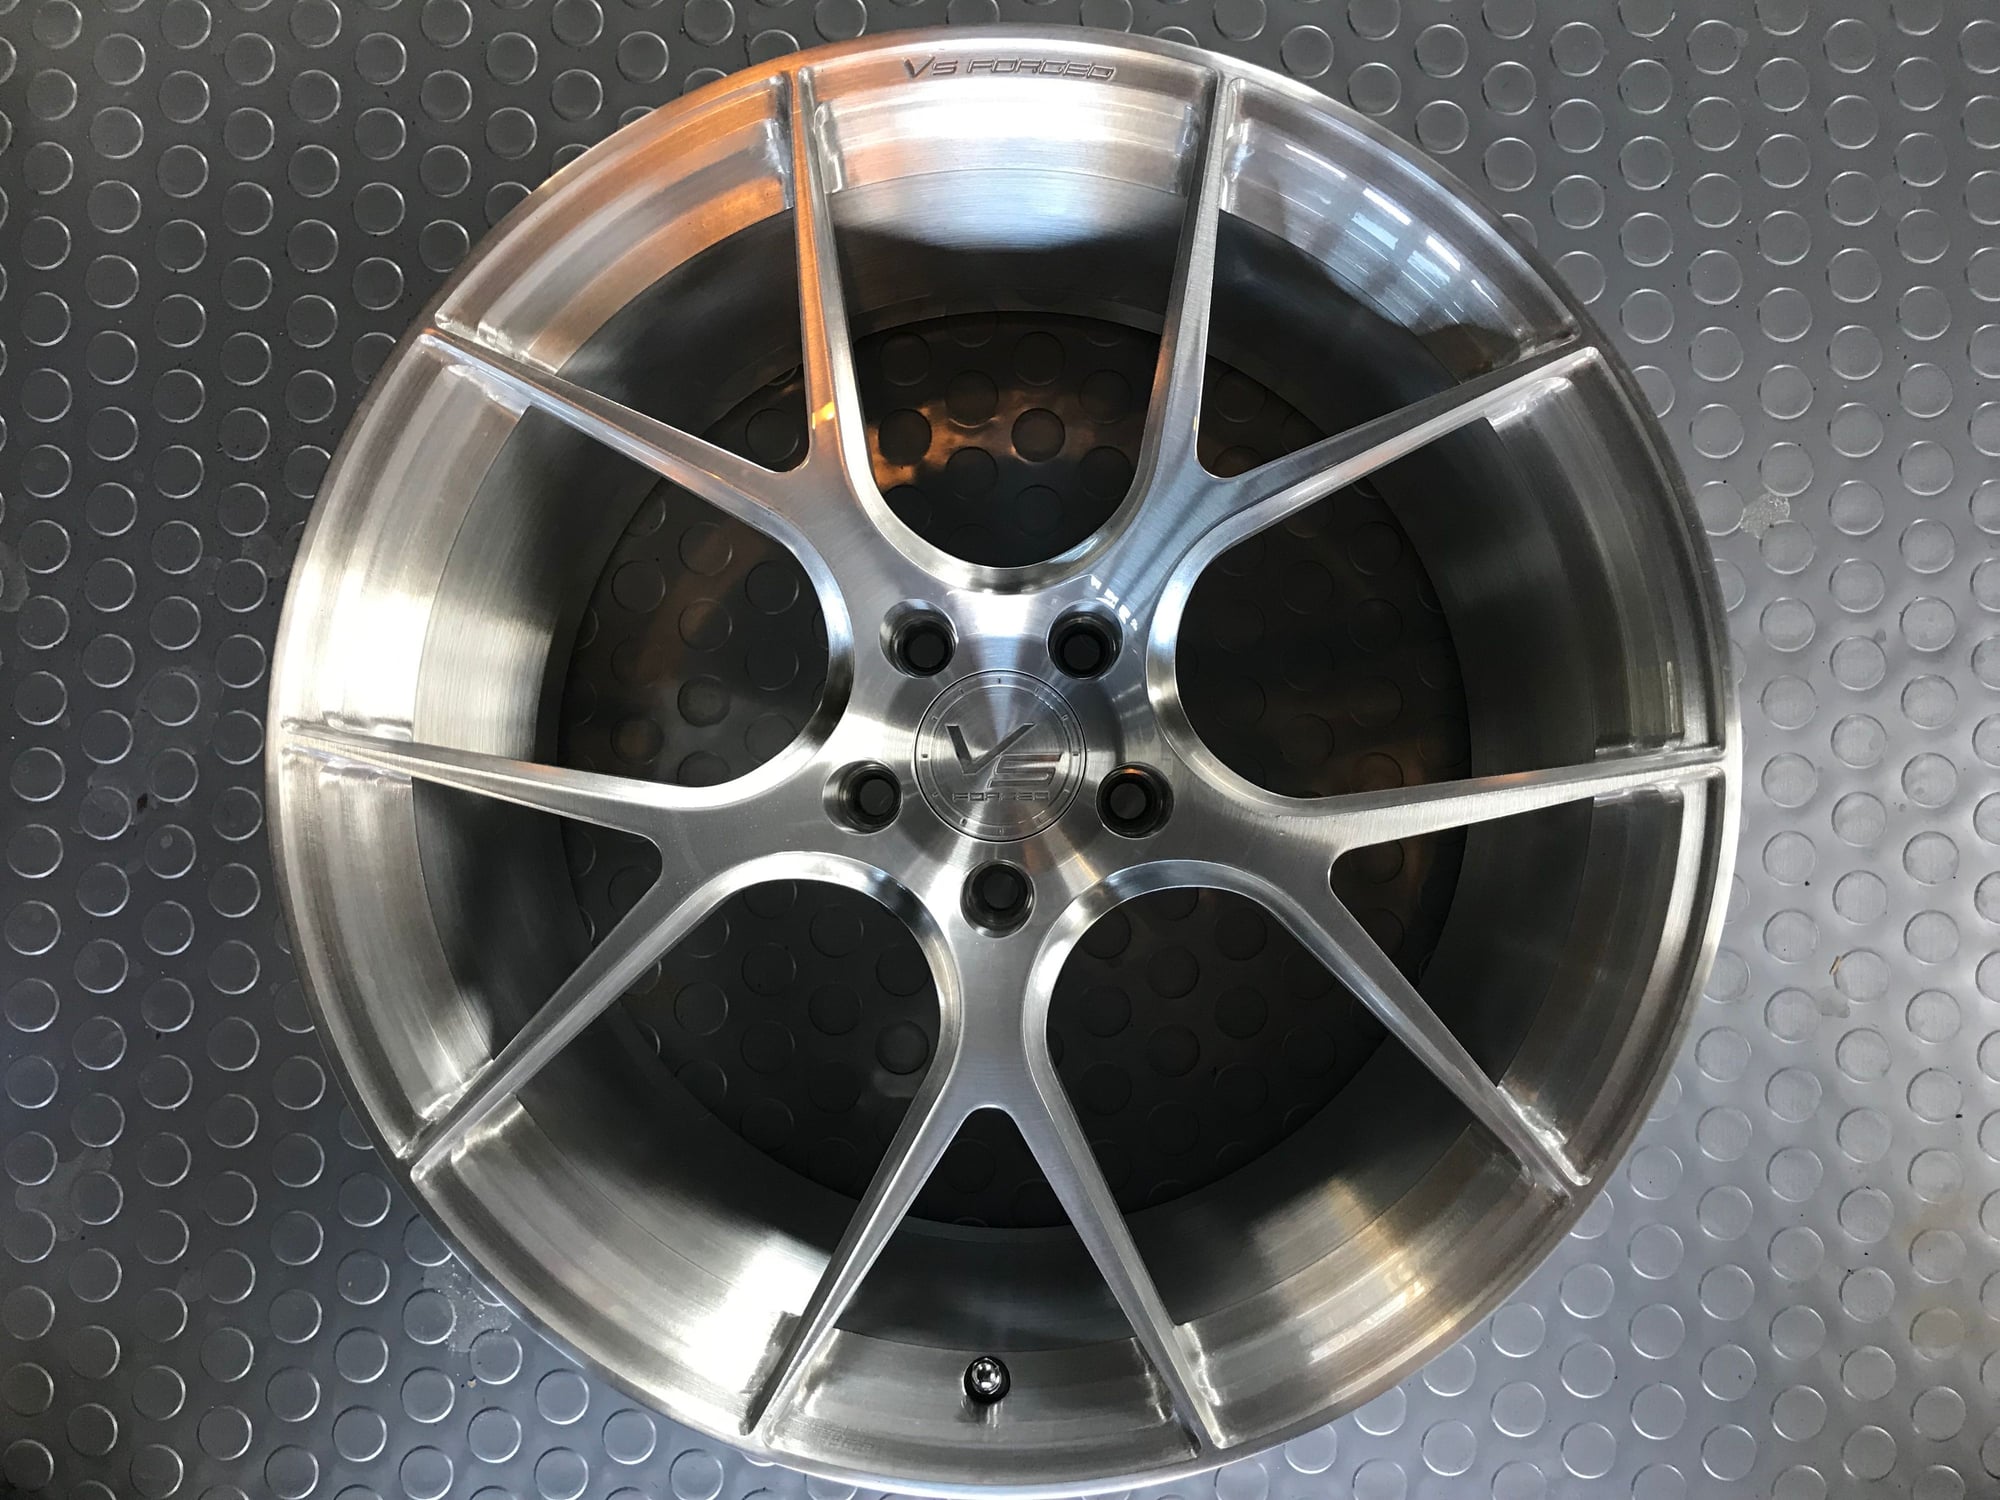 Wheels and Tires/Axles - Brand New VS Forged VS02 Wheels for R230/SL55/500/65/63-Brushed Clear Finish - $1,750 - New - 2003 to 2008 Mercedes-Benz SL55 AMG - 2003 to 2008 Mercedes-Benz SL65 AMG - 2009 to 2012 Mercedes-Benz SL63 AMG - 2003 to 2008 Mercedes-Benz SL600 - 2003 to 2008 Mercedes-Benz SL500 - 2005 to 2012 Mercedes-Benz SL550 - Fairfield, CT 06824, United States